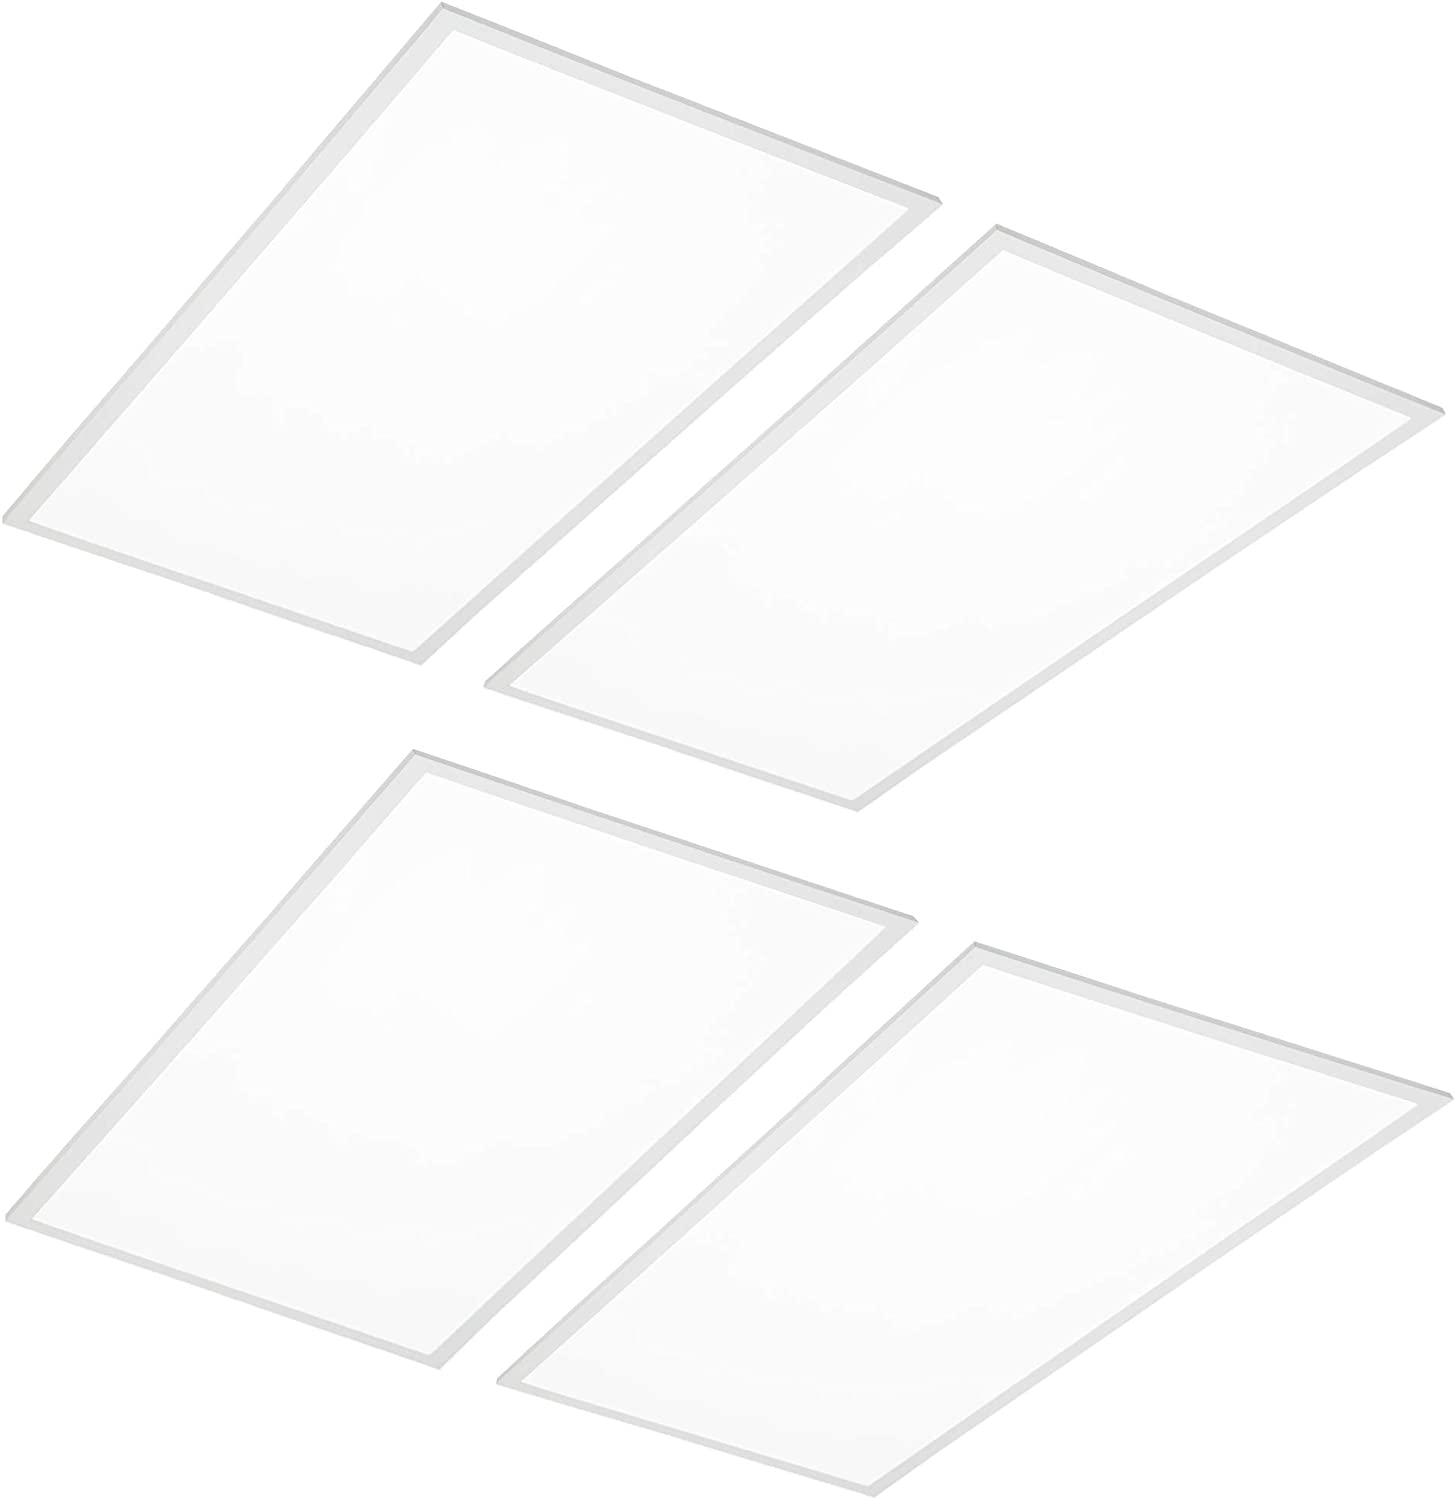 Top 5 Best LED Panel Light Reviews - Brand Review